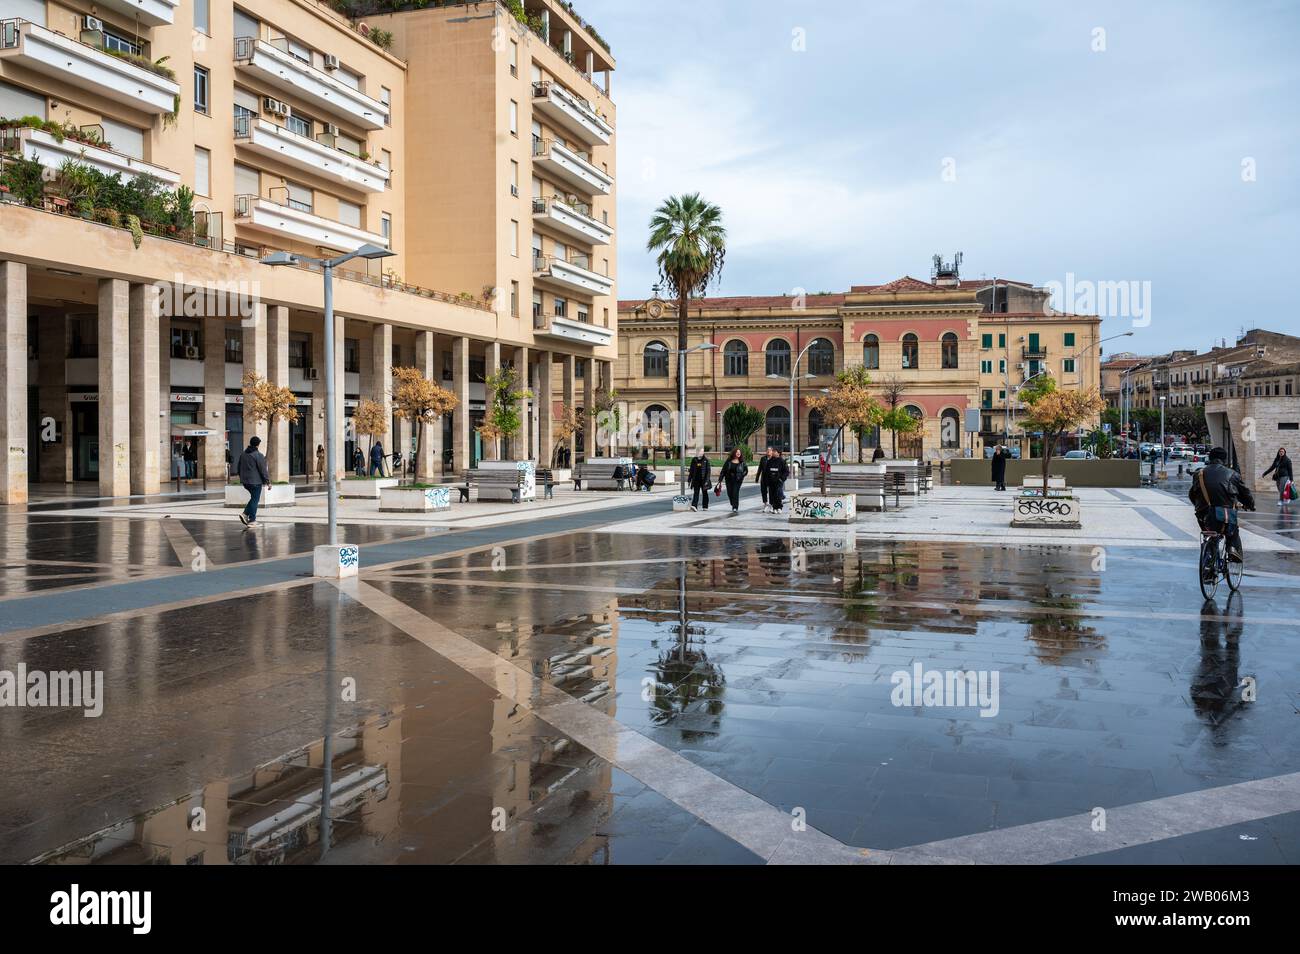 Palermo, Sicily, Italy, 15 December 2023 - The Vittorio Emanuele Orlando Square with restaurants and houses reflecting in the wet tiles Stock Photo